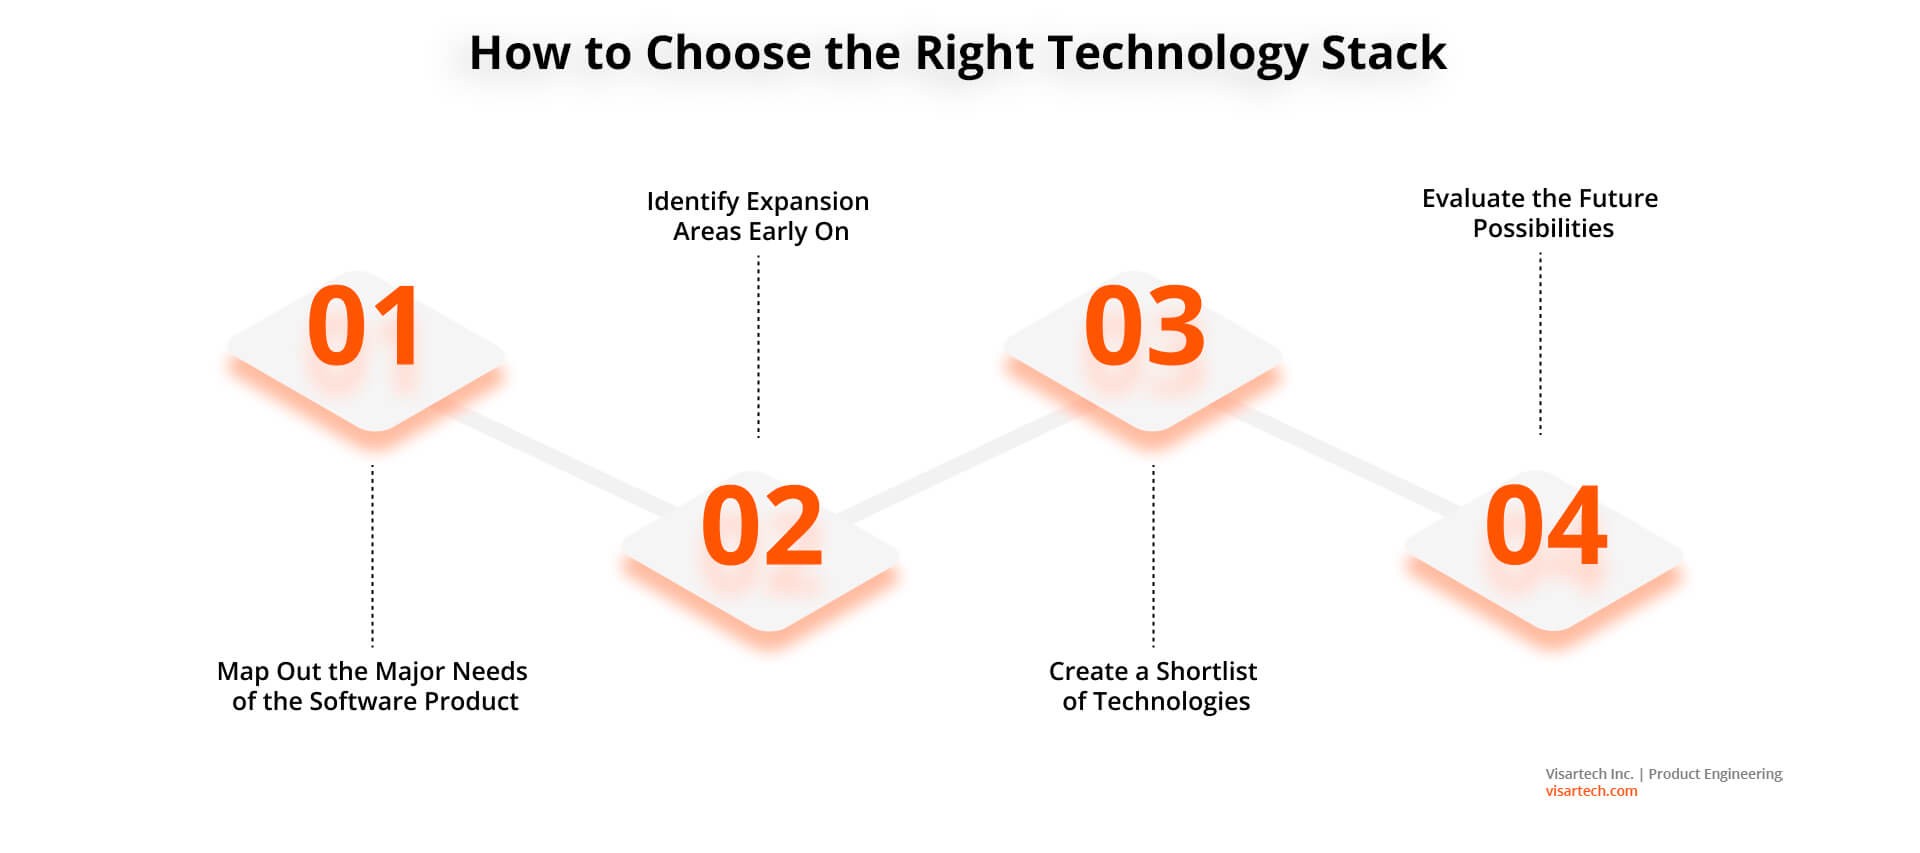 How to Choose the Right Technology Stack - Visartech Blog